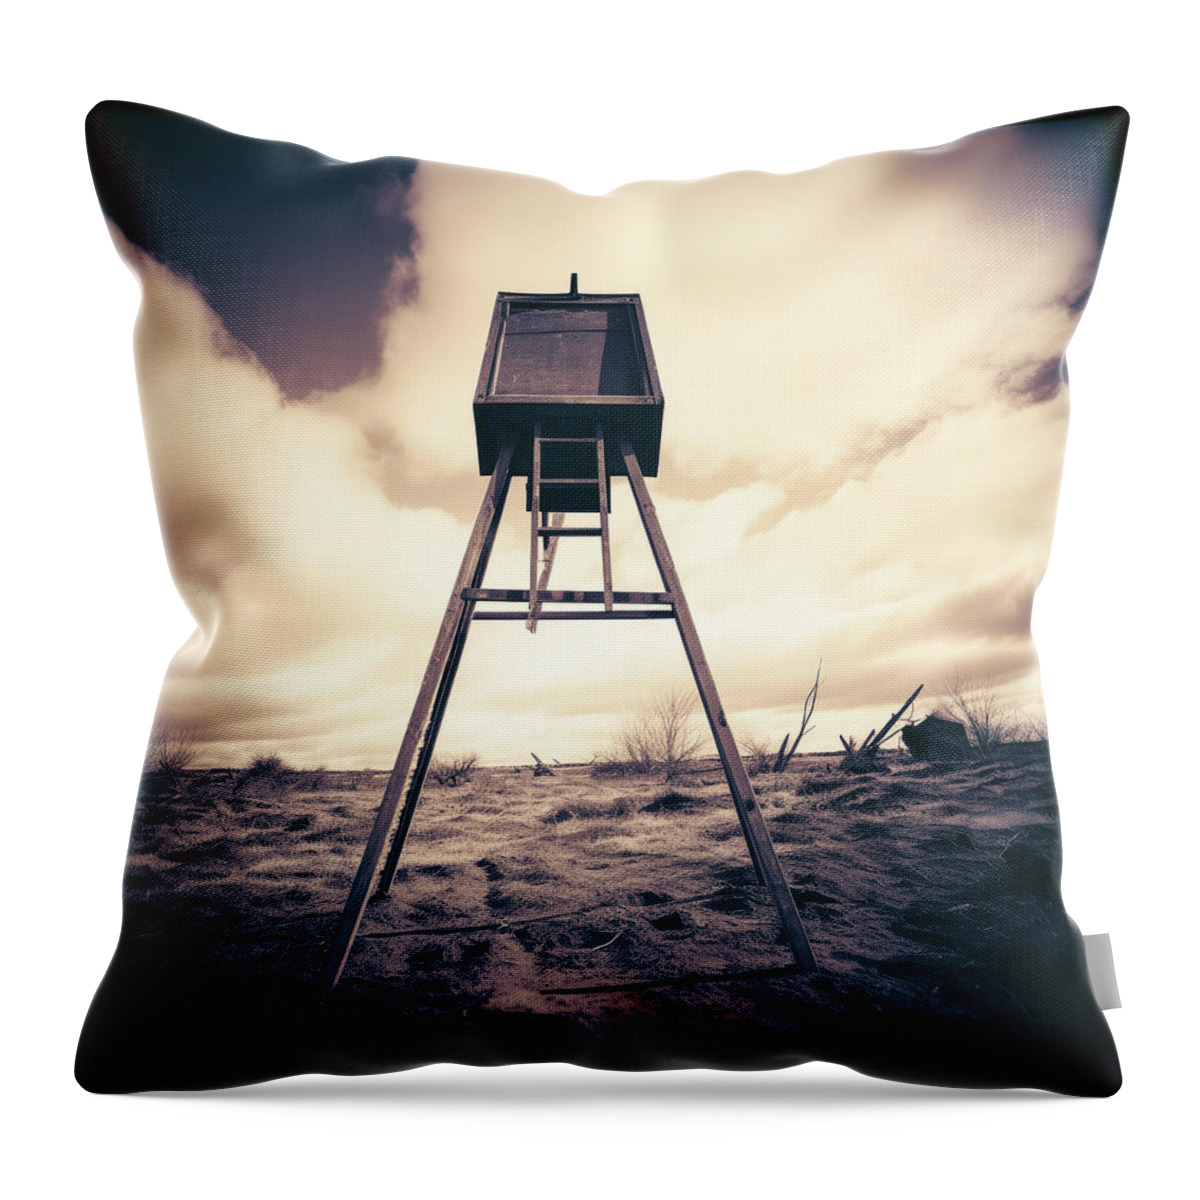 Bat Throw Pillow featuring the digital art Wooden Box on High Stand Pinhole Image by YoPedro